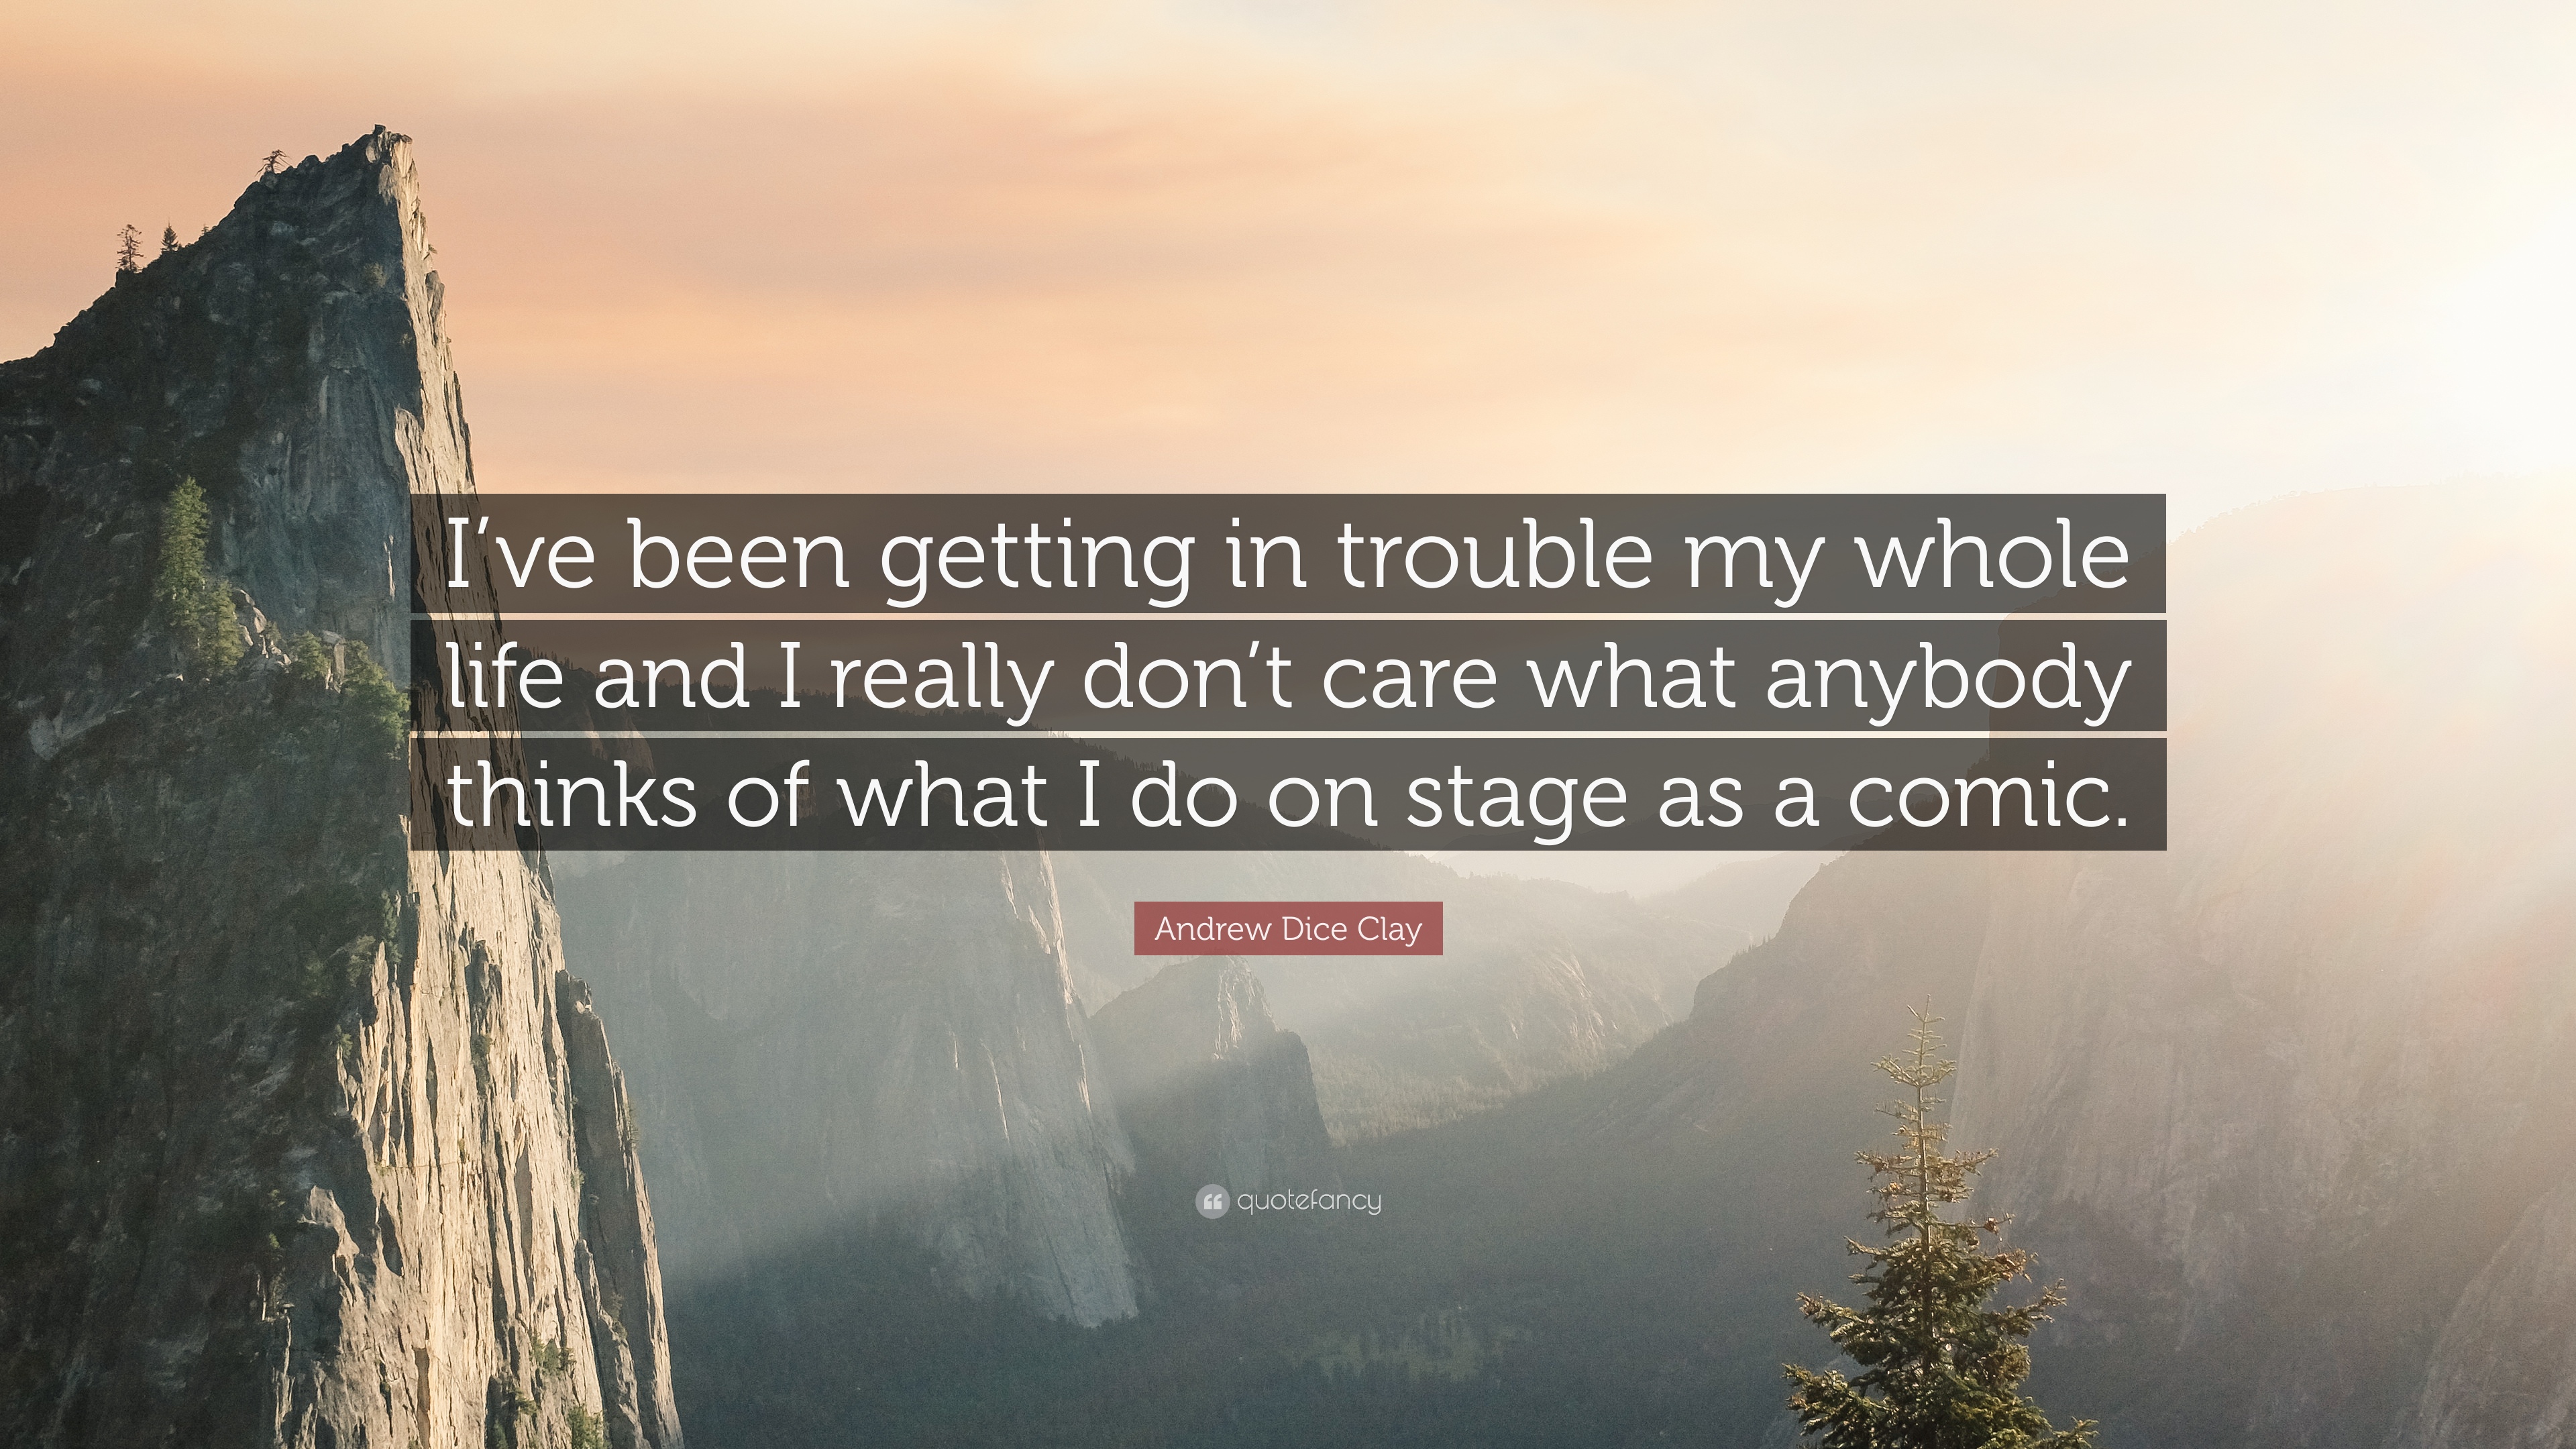 Andrew Dice Clay Quote: “I've been getting in trouble my whole life ...